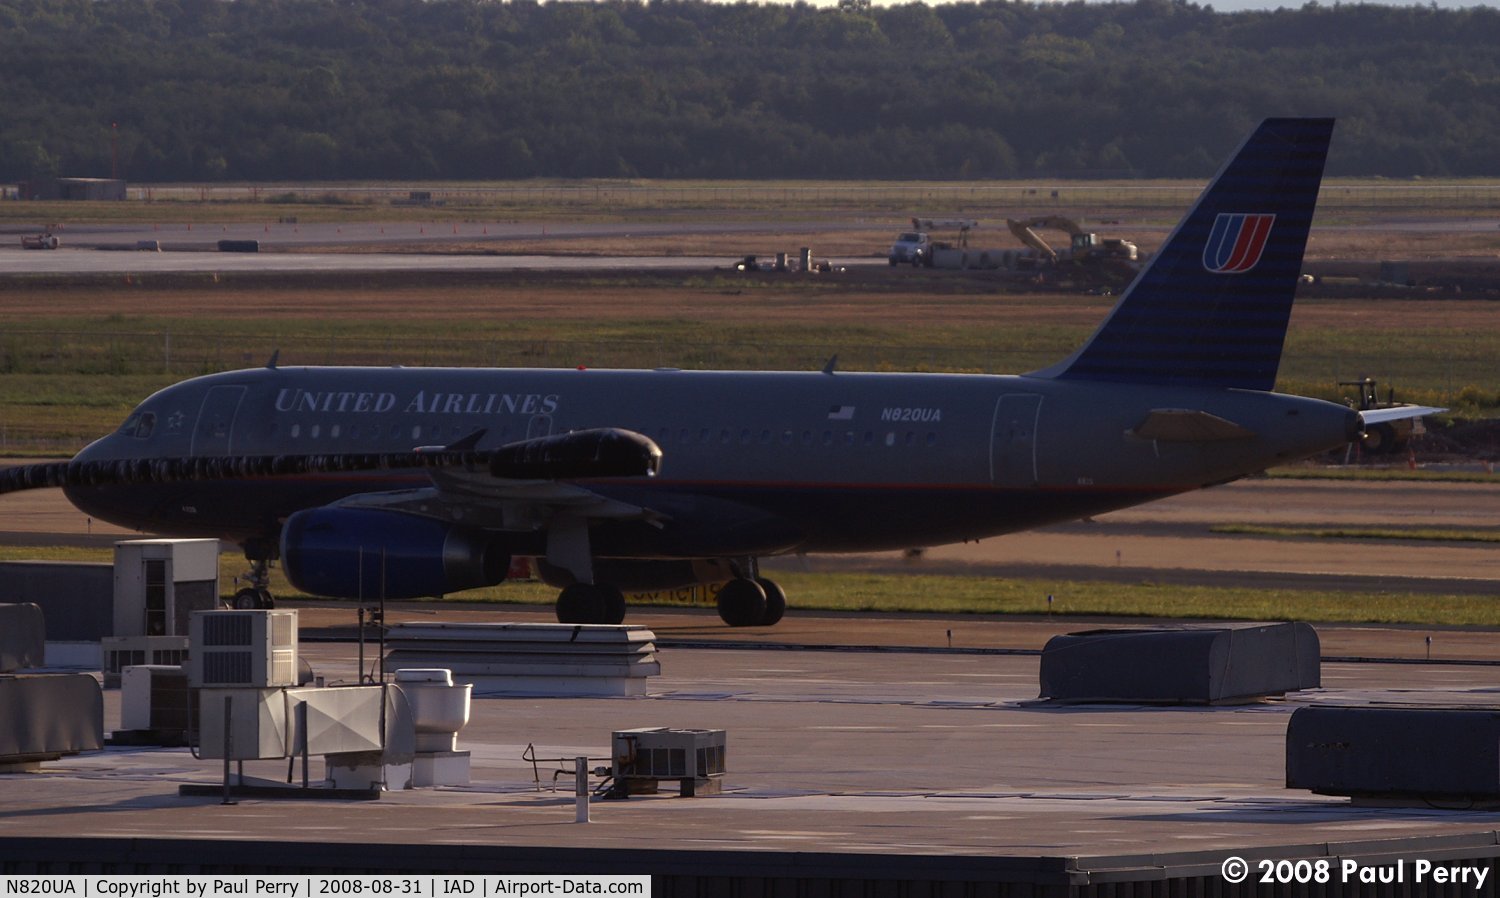 N820UA, 1998 Airbus A319-131 C/N 898, One more United bird taxiing about